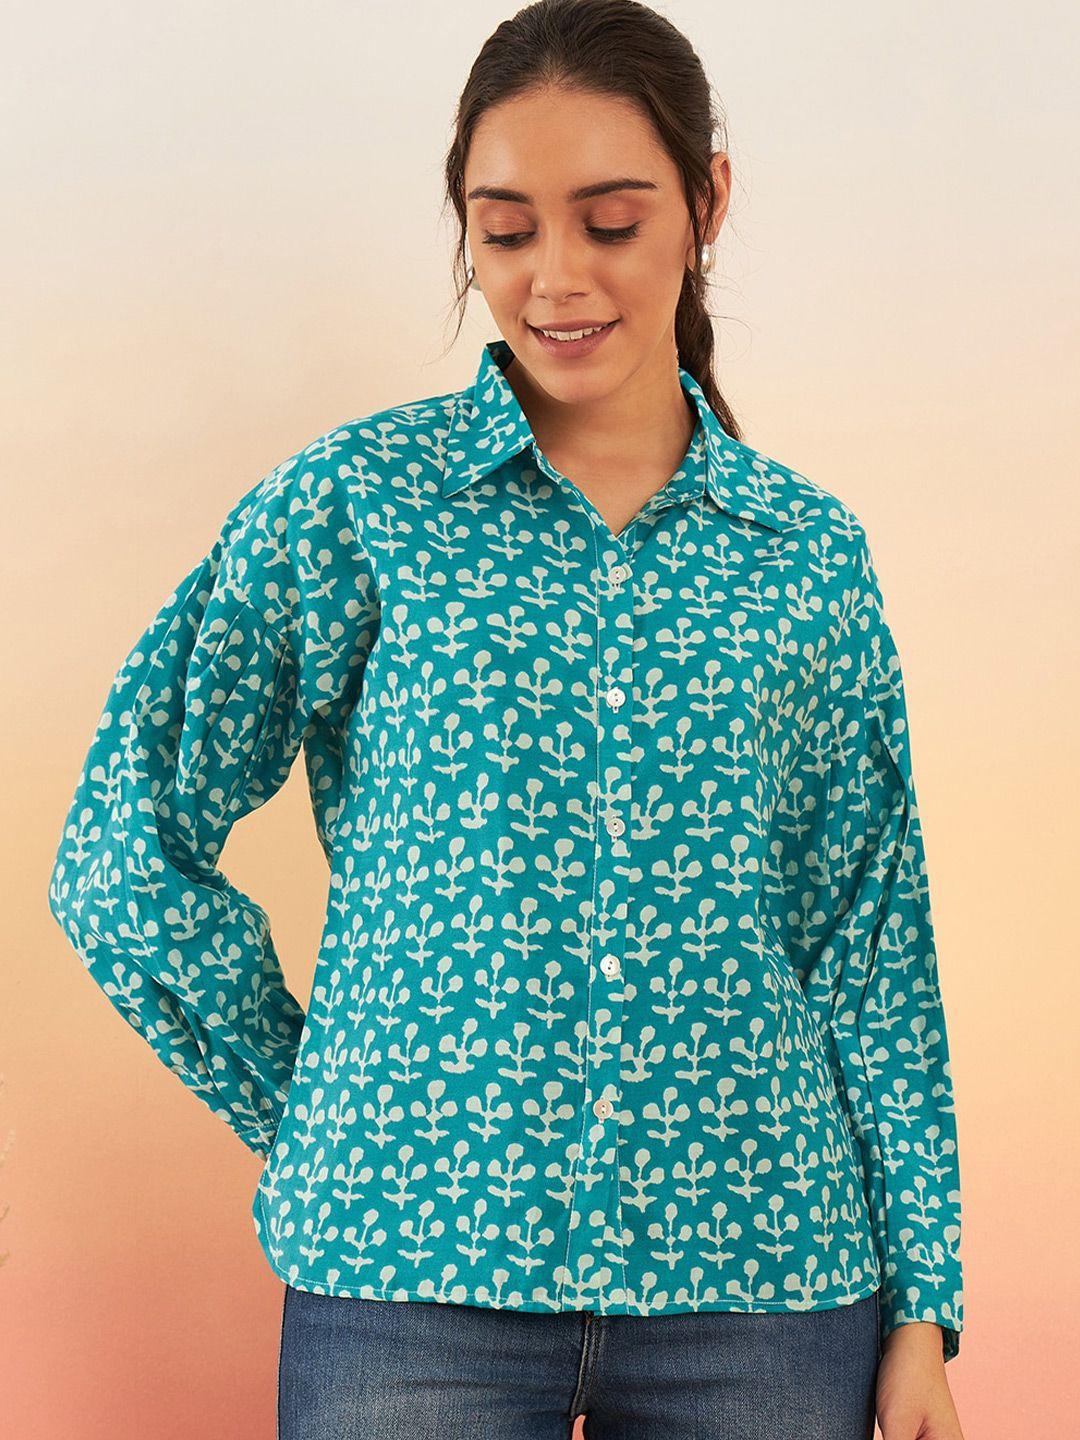 sangria-turquoise-blue-&-off-white-ethnic-motifs-printed-shirt-style-top